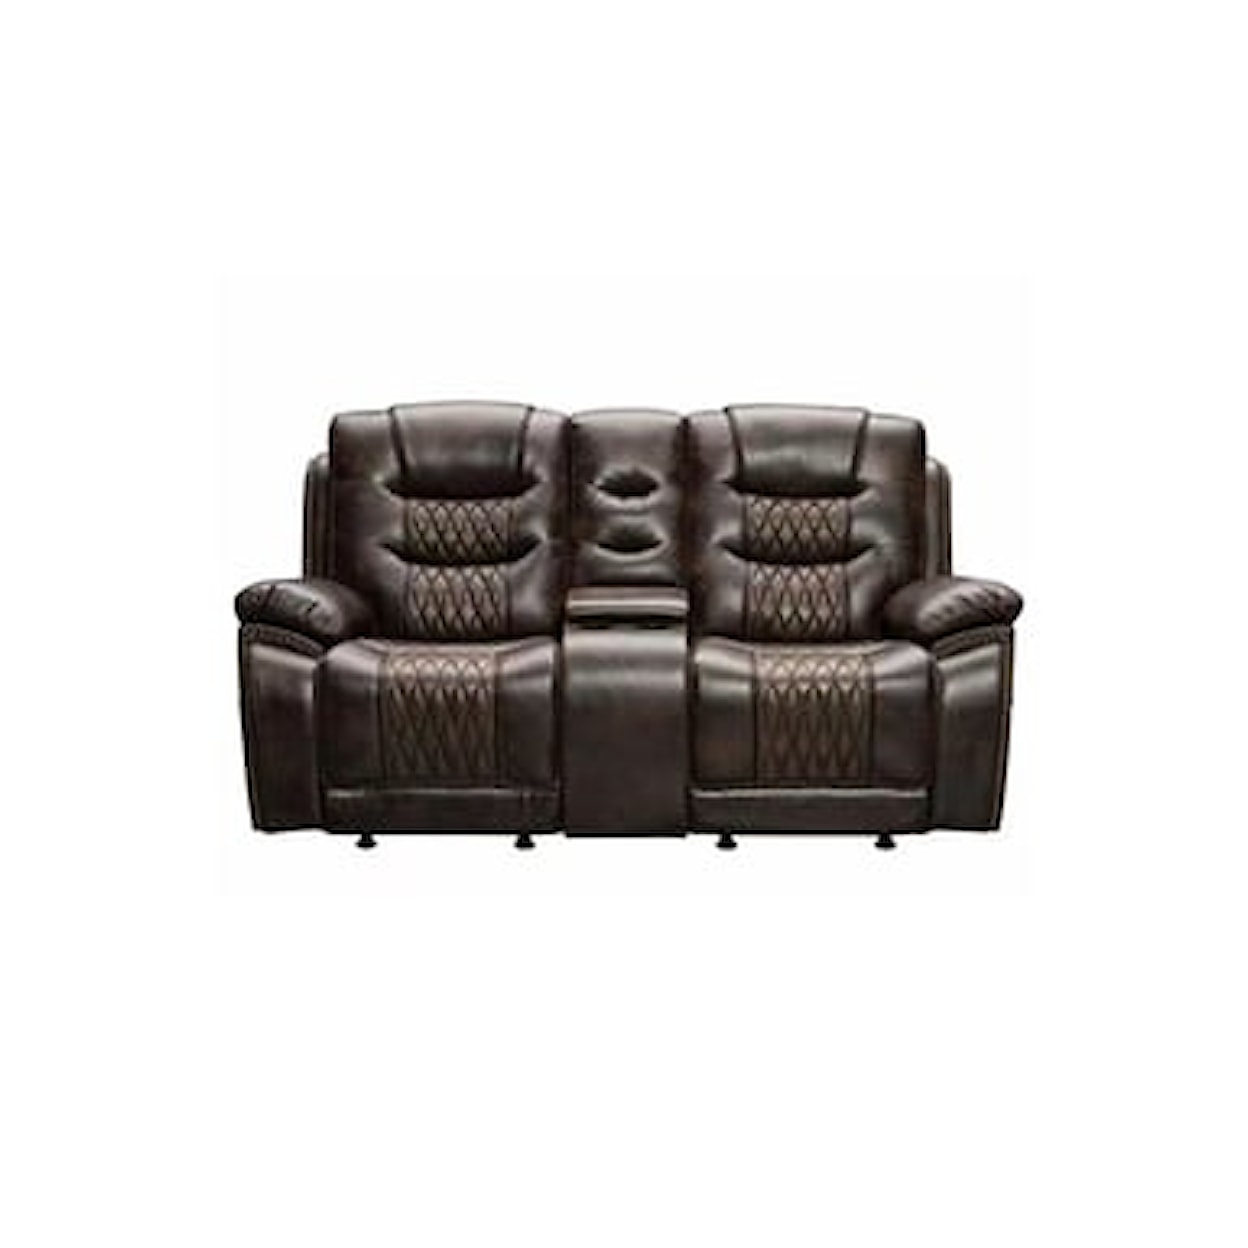 New Classic Furniture Nikko Console Loveseat with Power Footrest